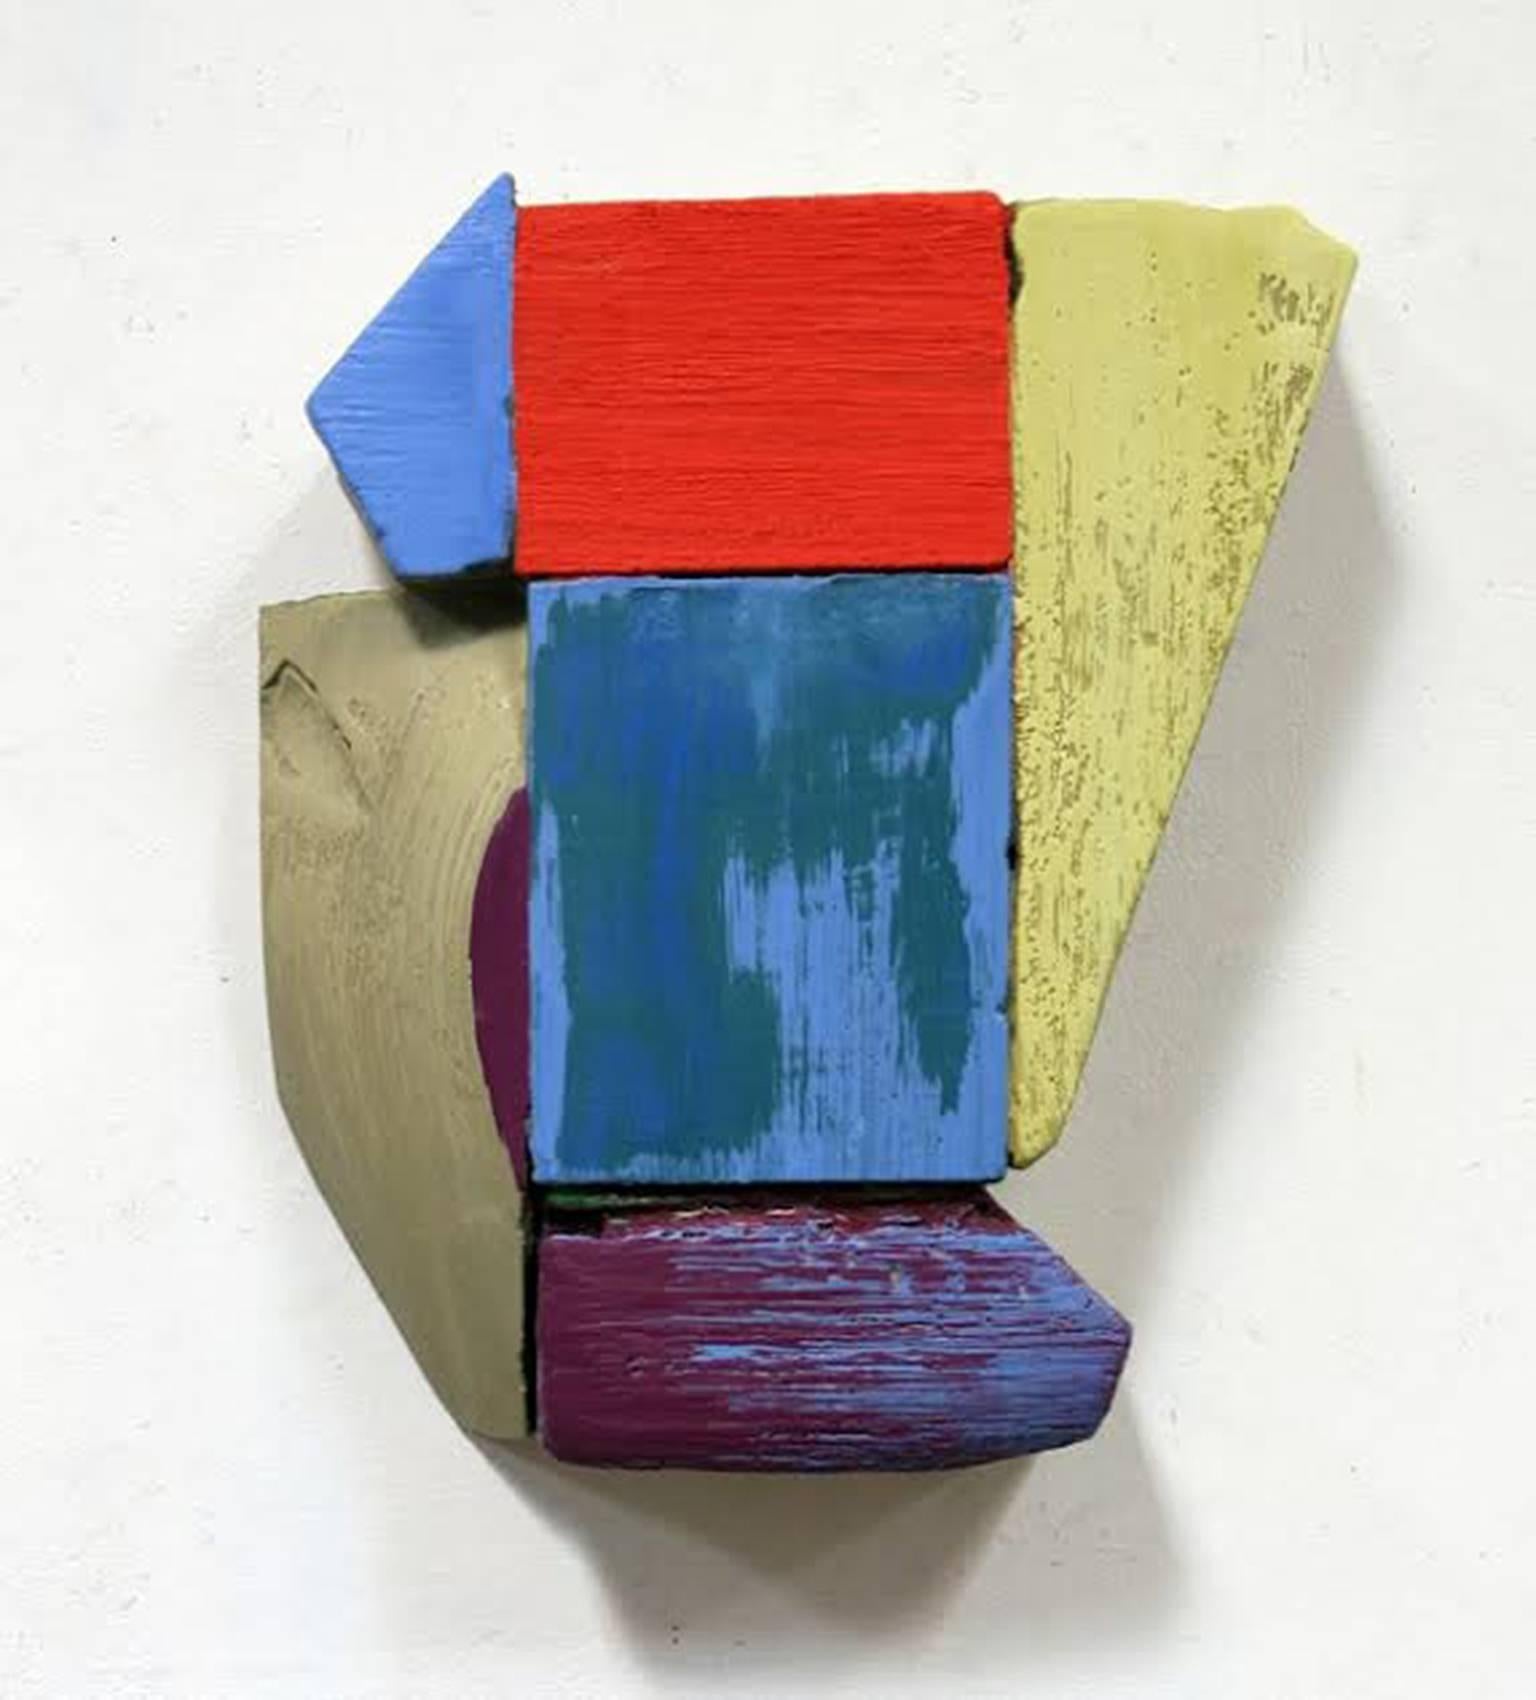 Ned Evans Abstract Sculpture - Wall Relief 3 - Oil Paint and Resin on Wood - Modern Abstract - Multicolored